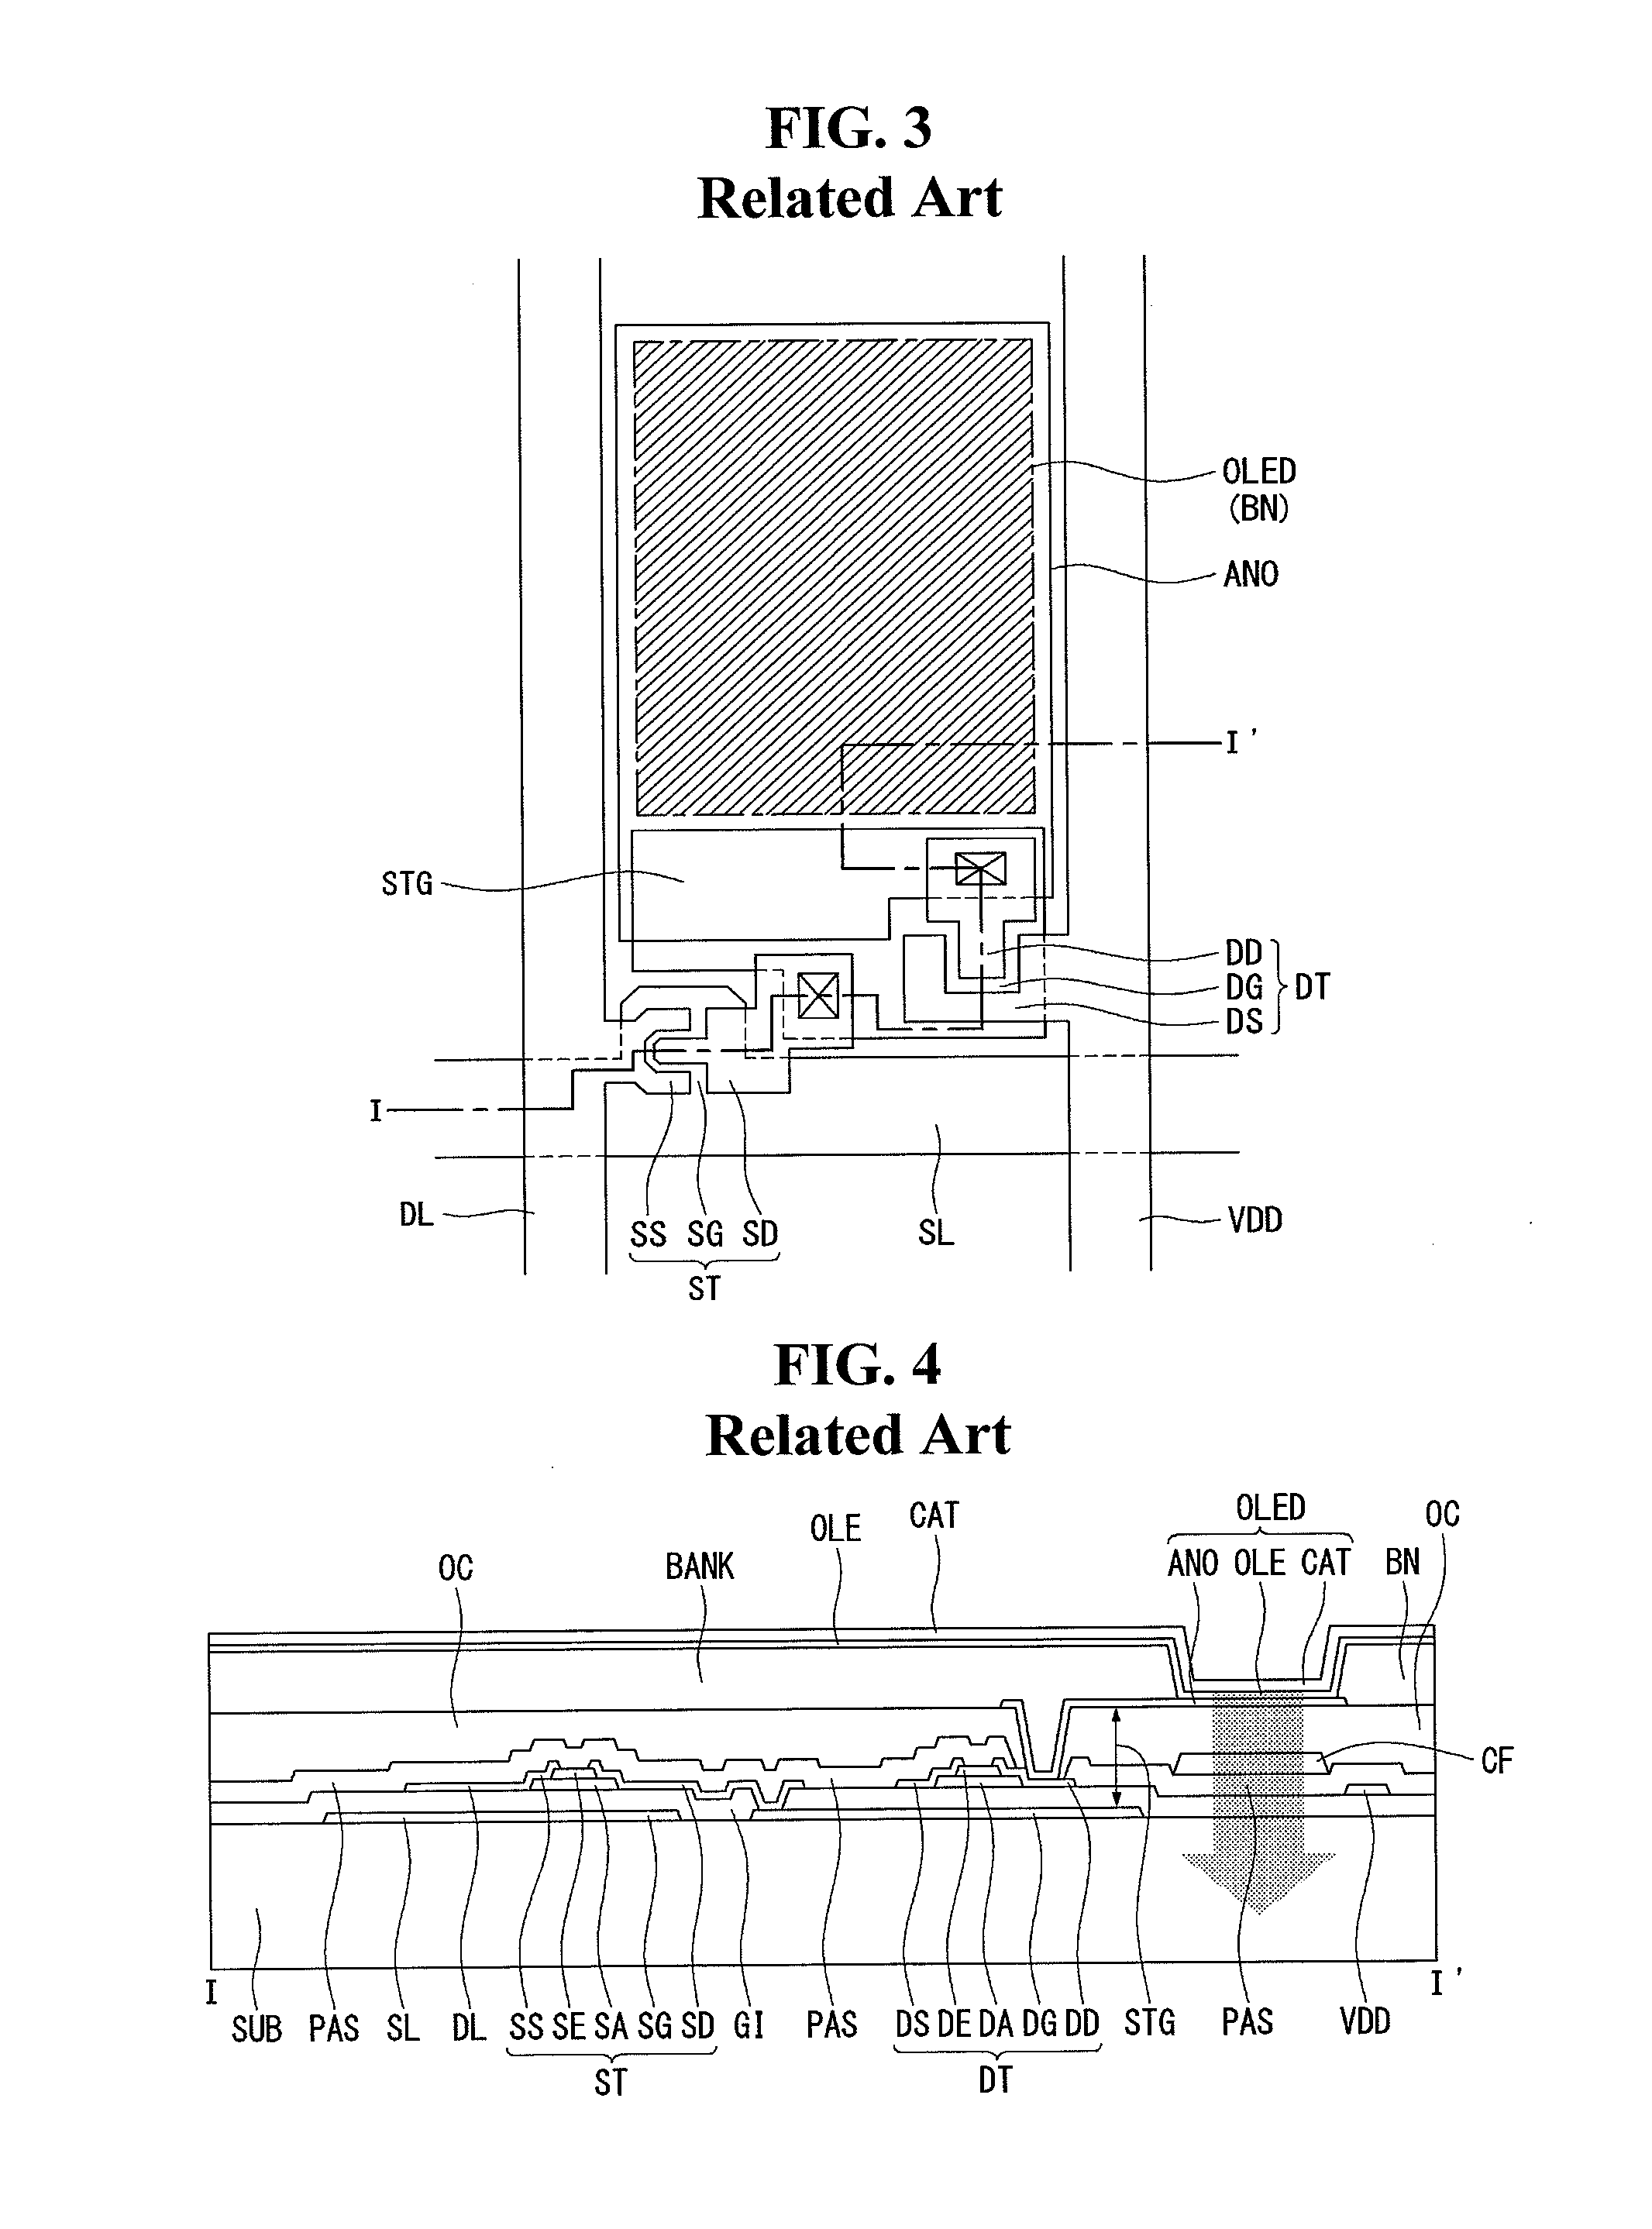 Organic light emitting diode display having thin film transistor substrate using oxide semiconductor